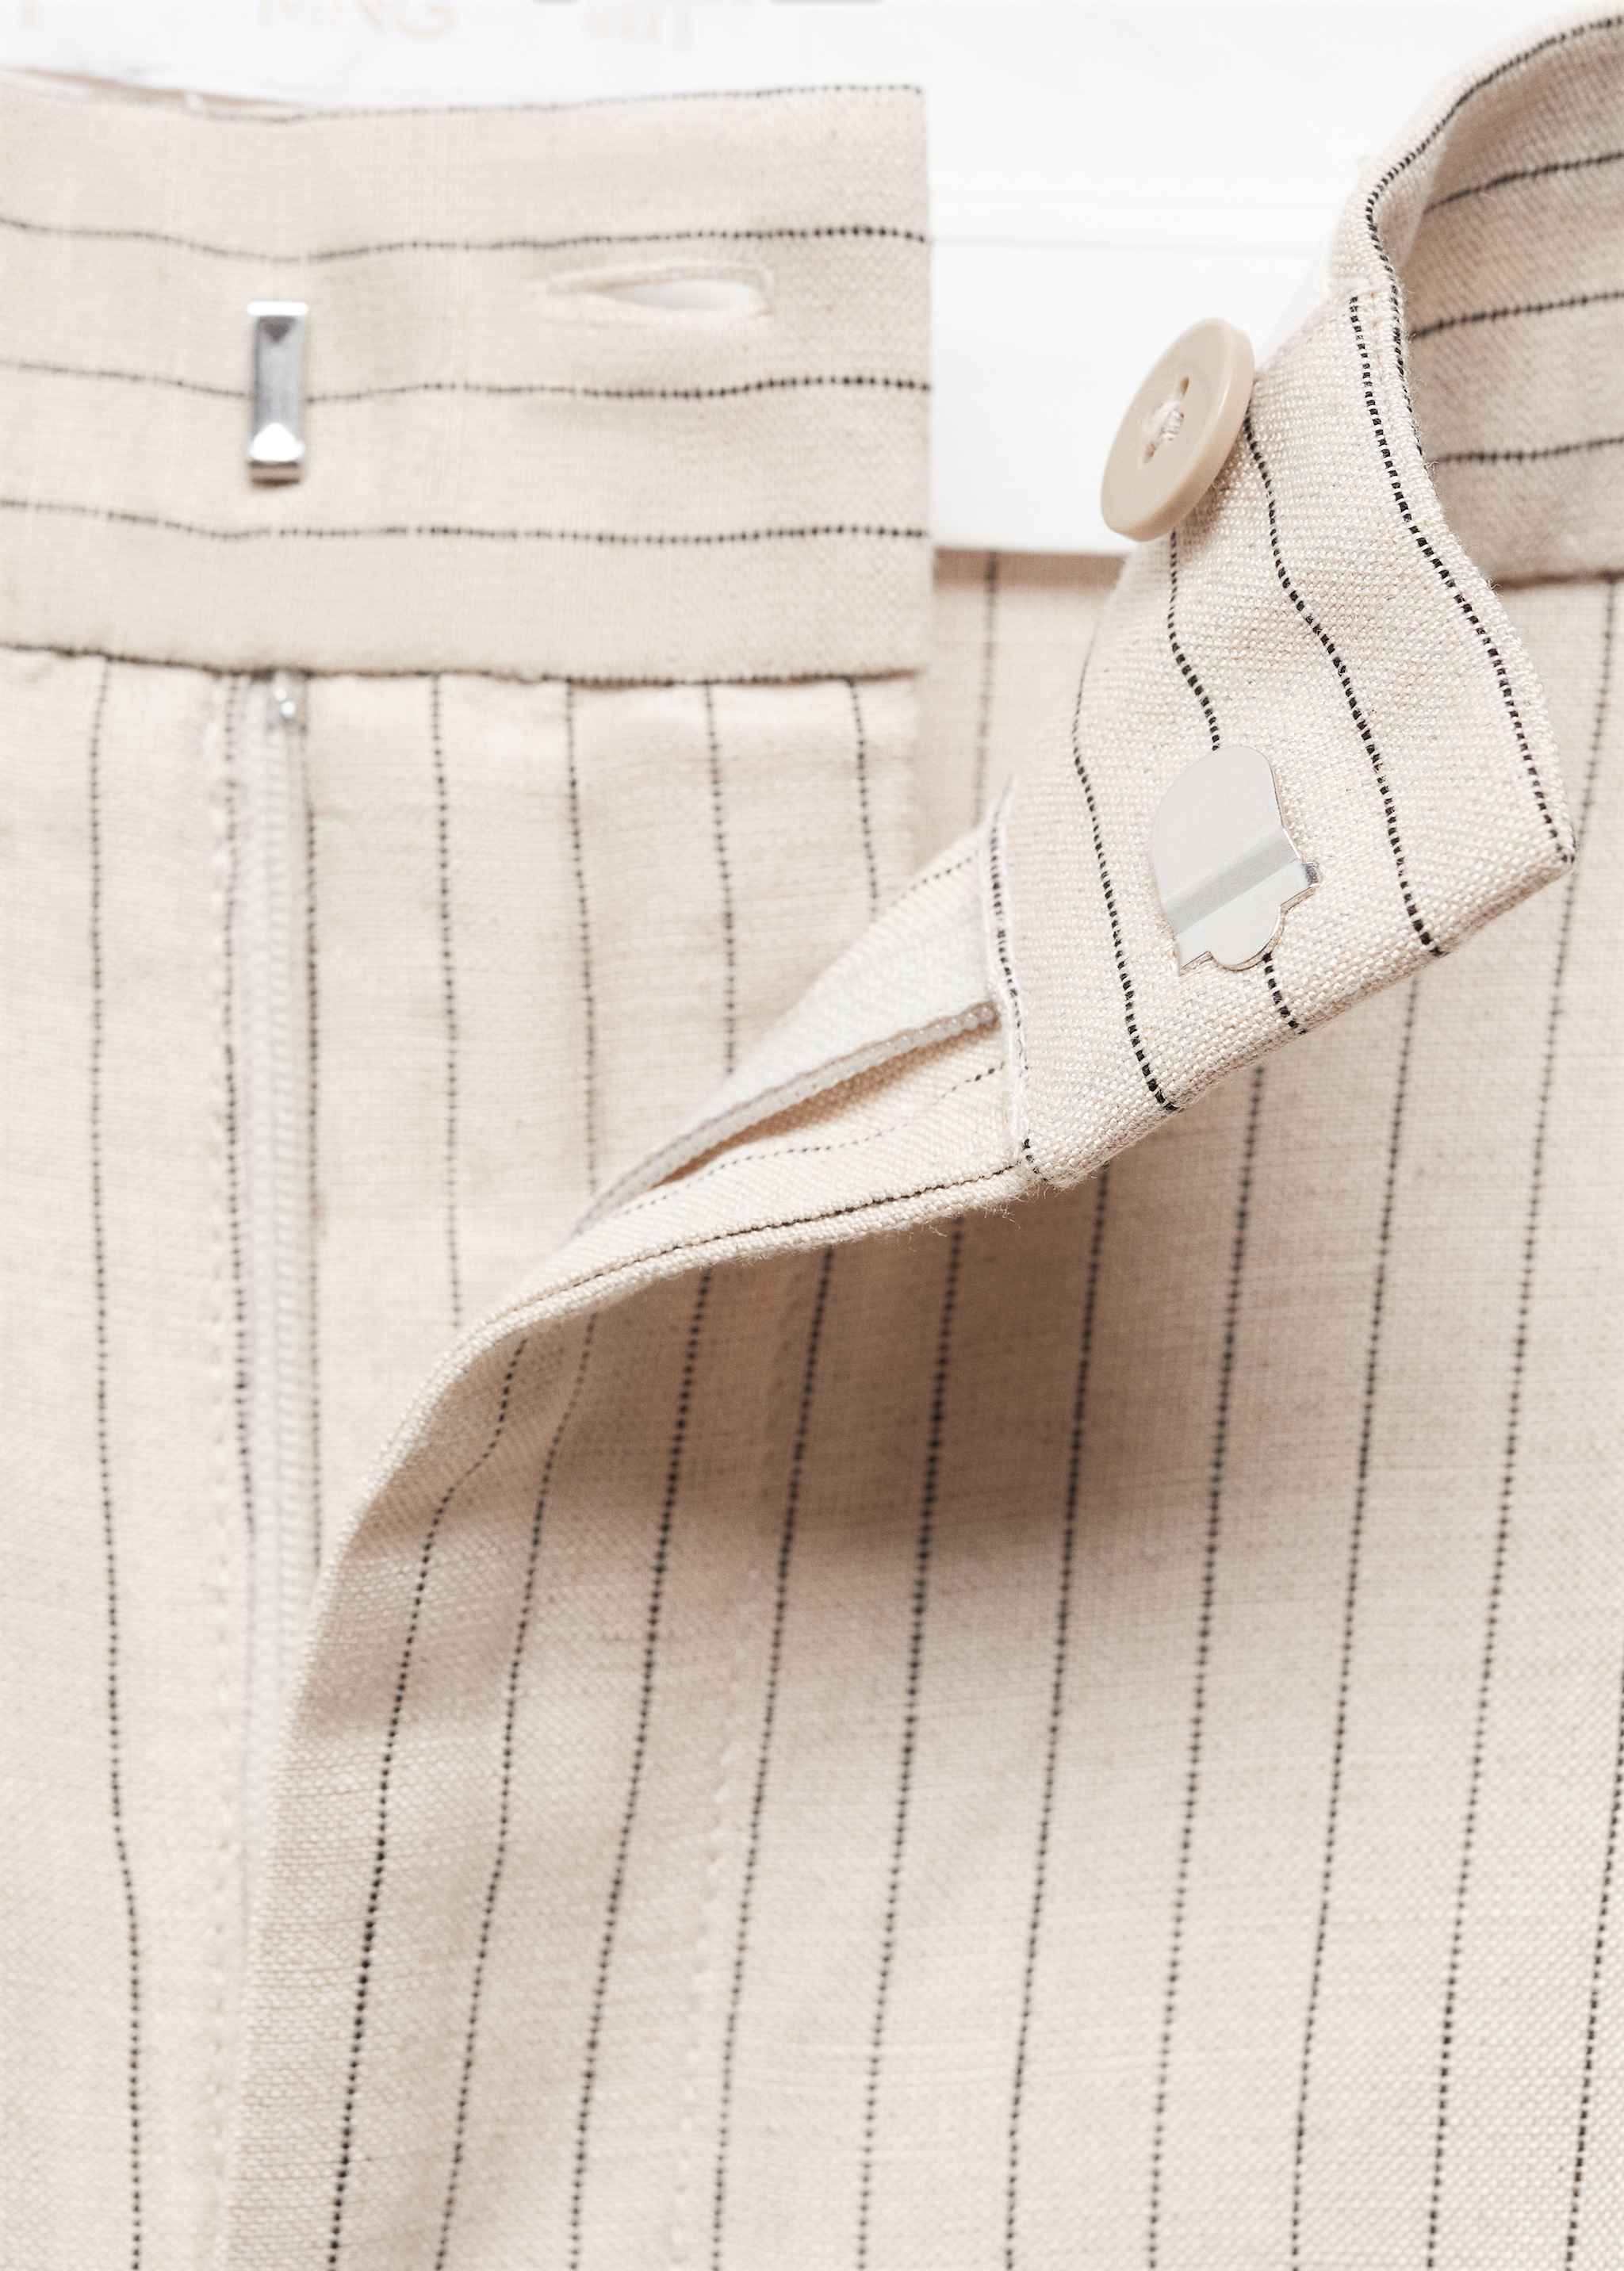 Striped suit trousers - Details of the article 8